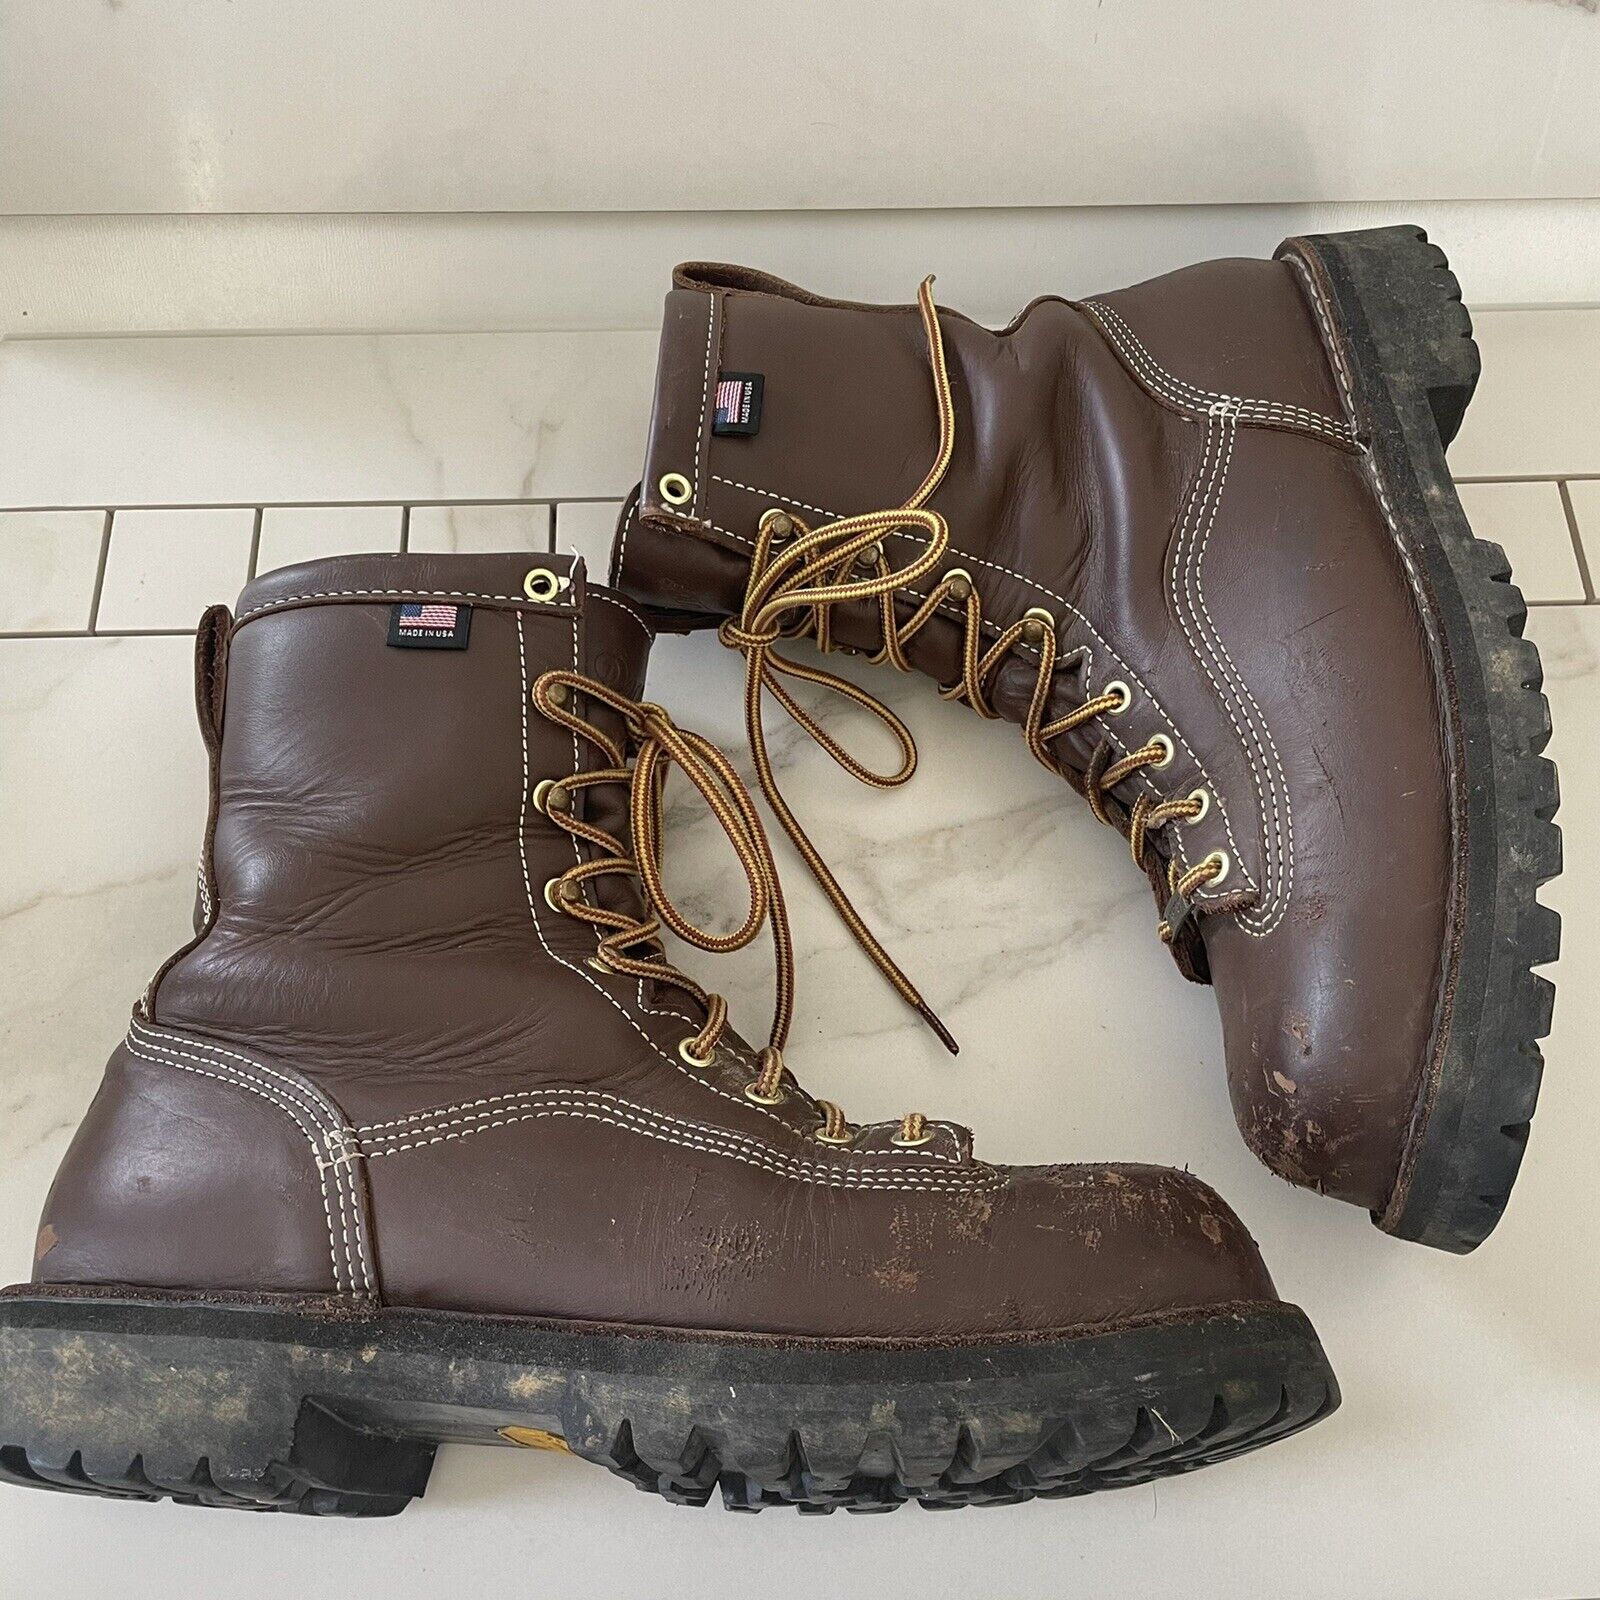 Danner Super Rain Forest Boots Gore-Tex 11565 Brown Leather 